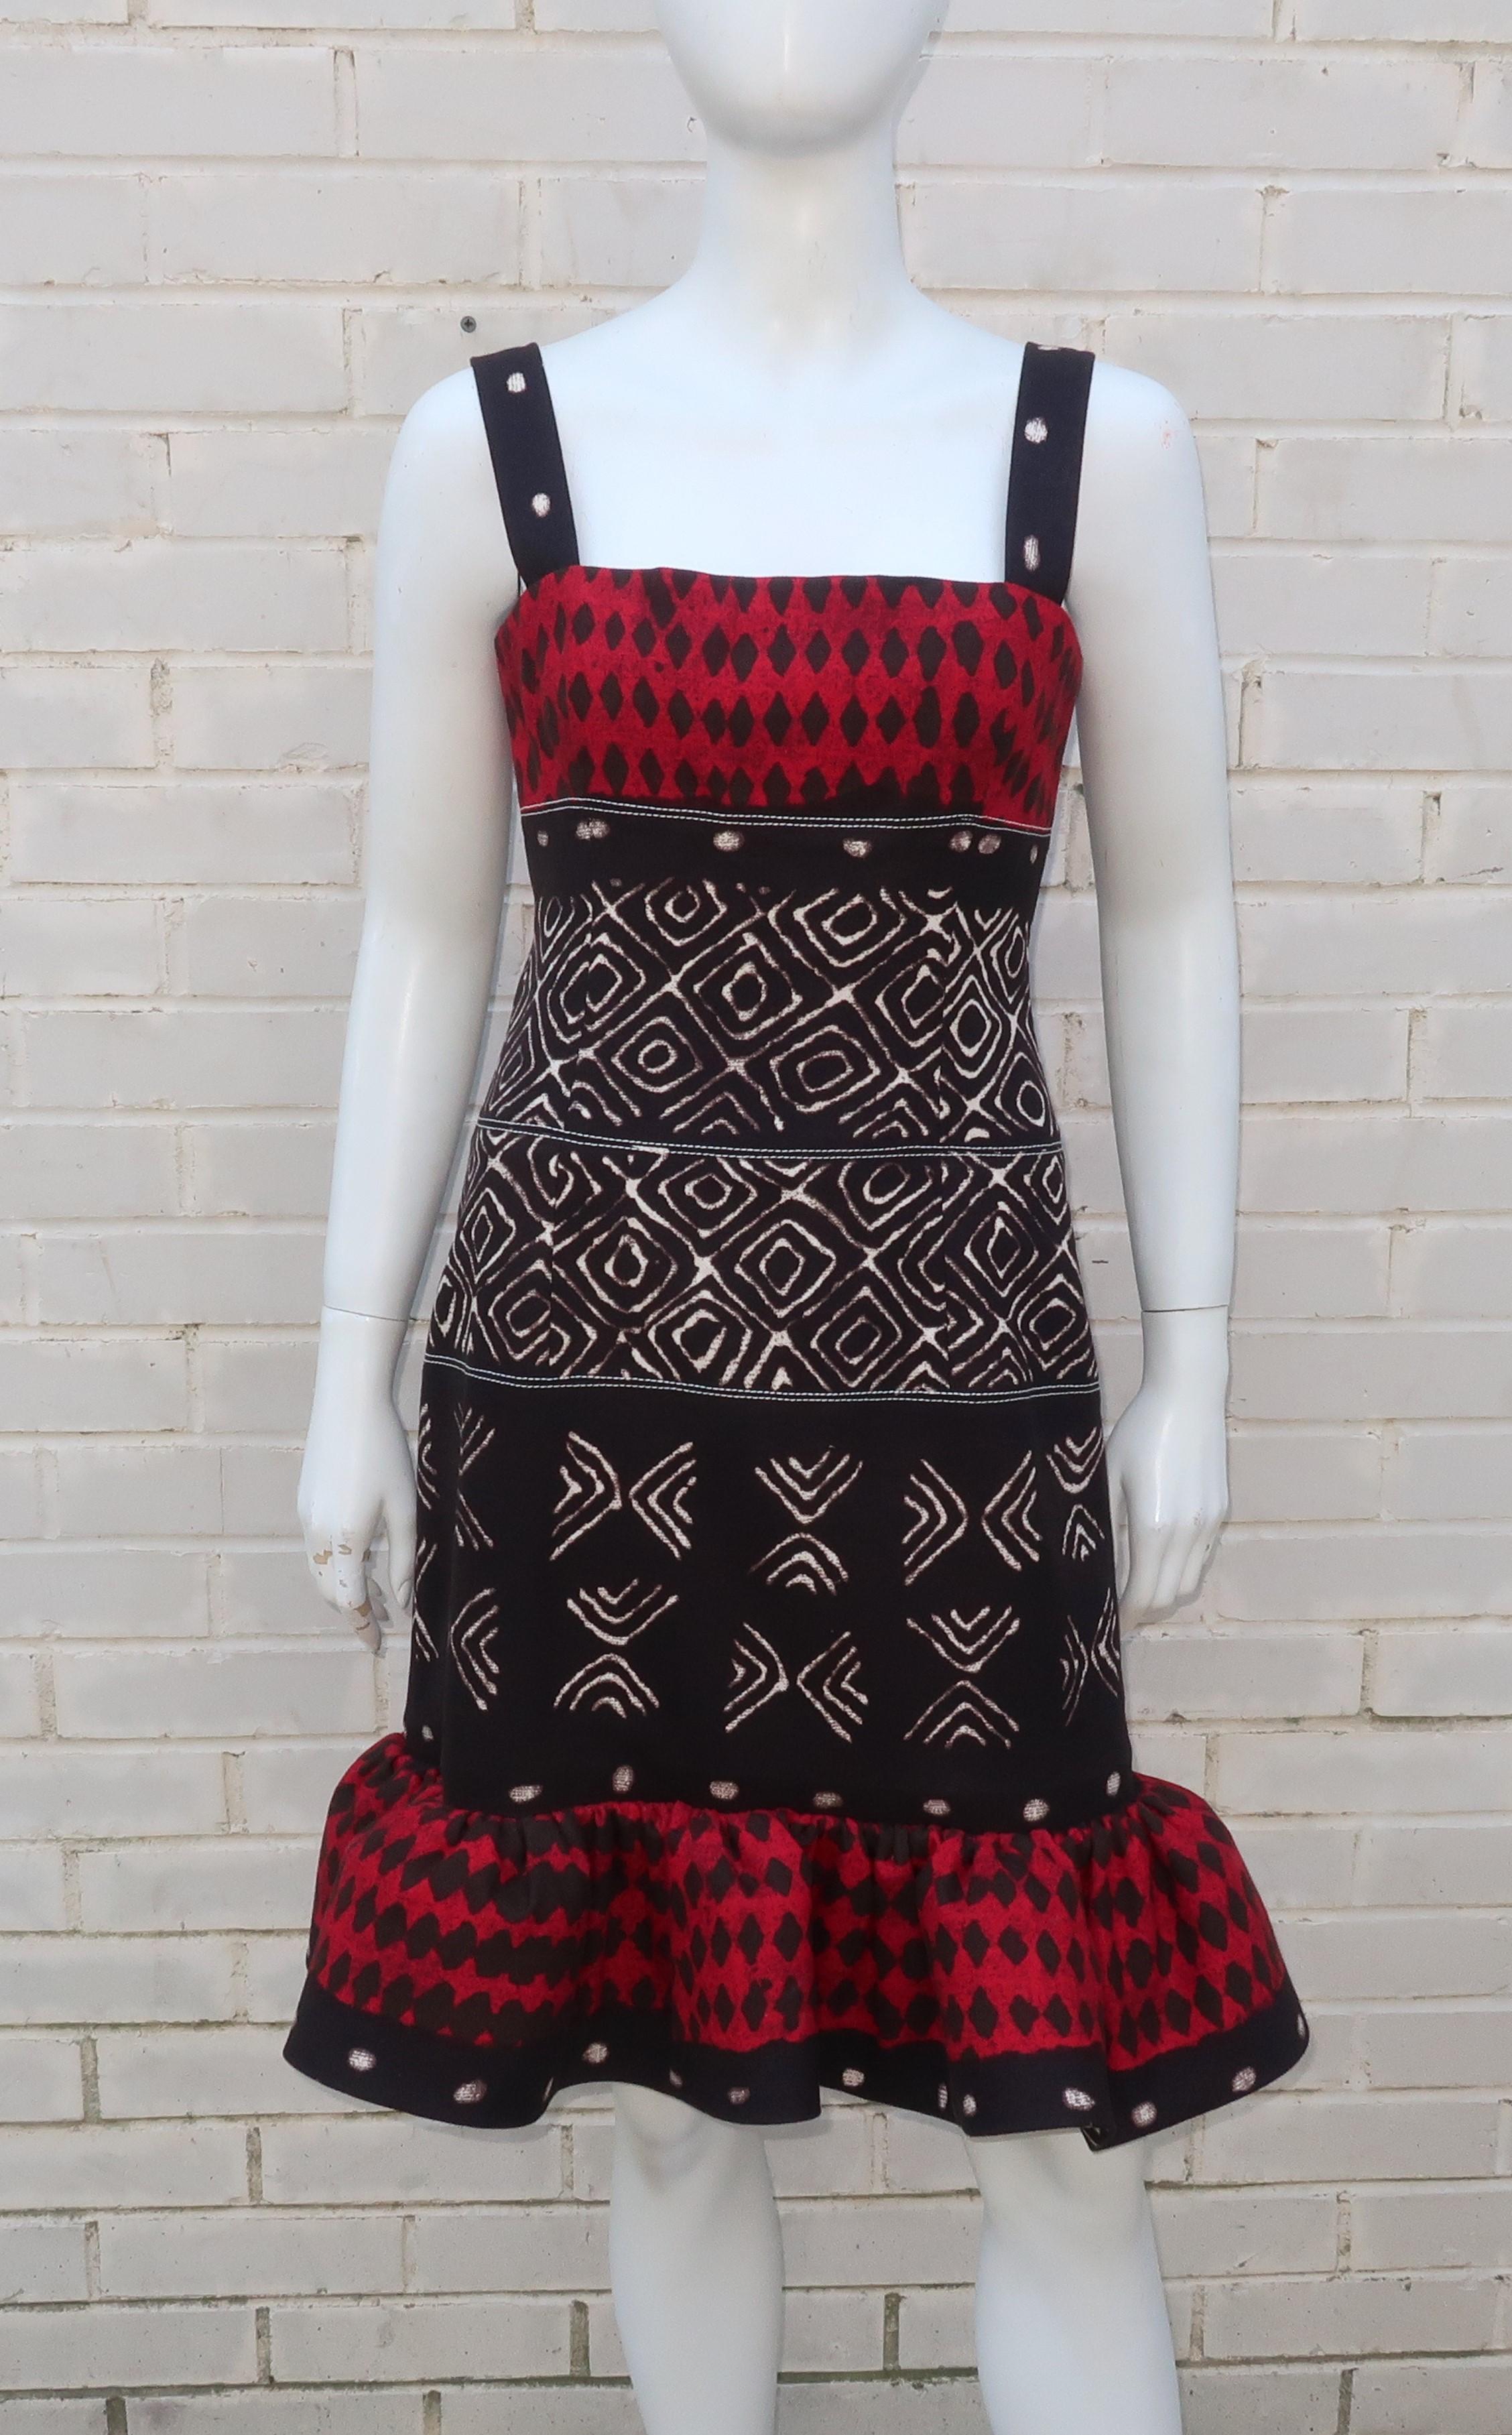 Fun and flirty with a good dose of exoticism ... this Oscar de la Renta dress has it all!  The heavy cotton tribal motif fabric has the weight and feel of upholstery which is perfect for providing just the right amount of stiffness and shape to the